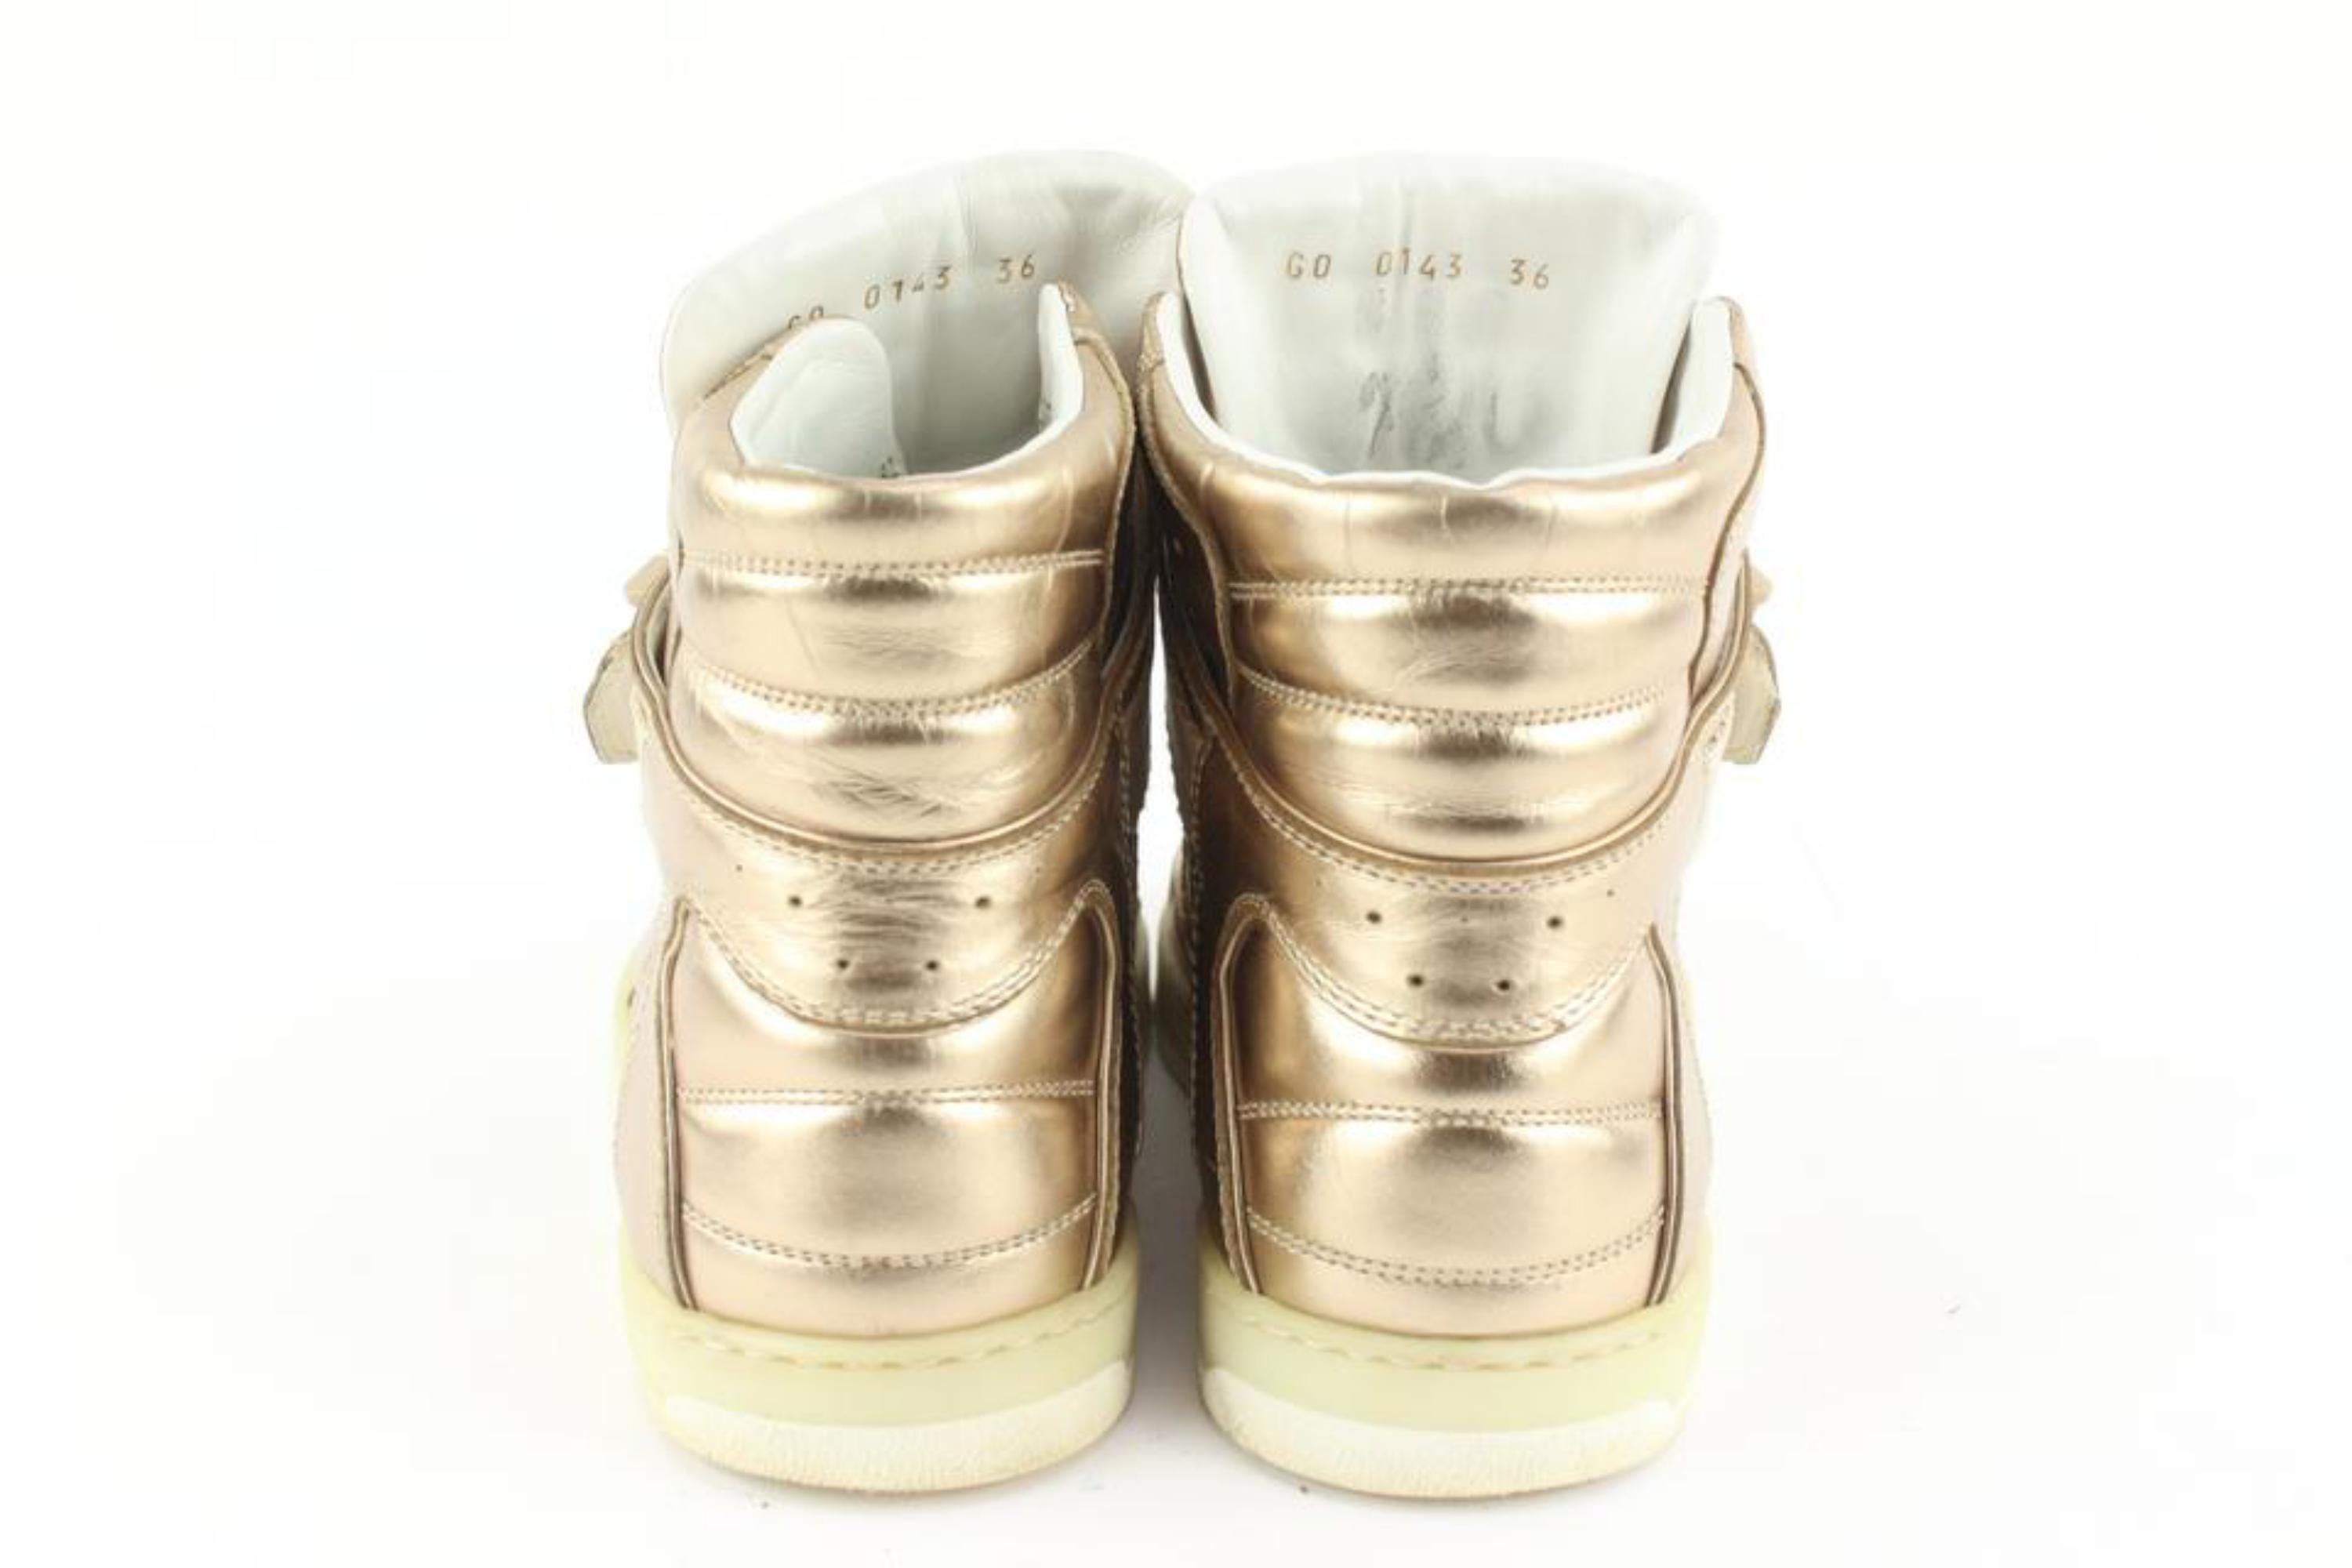 Louis Vuitton Size 36 Gold Metallic High Top Sneaker 1223lv15 In Excellent Condition For Sale In Dix hills, NY